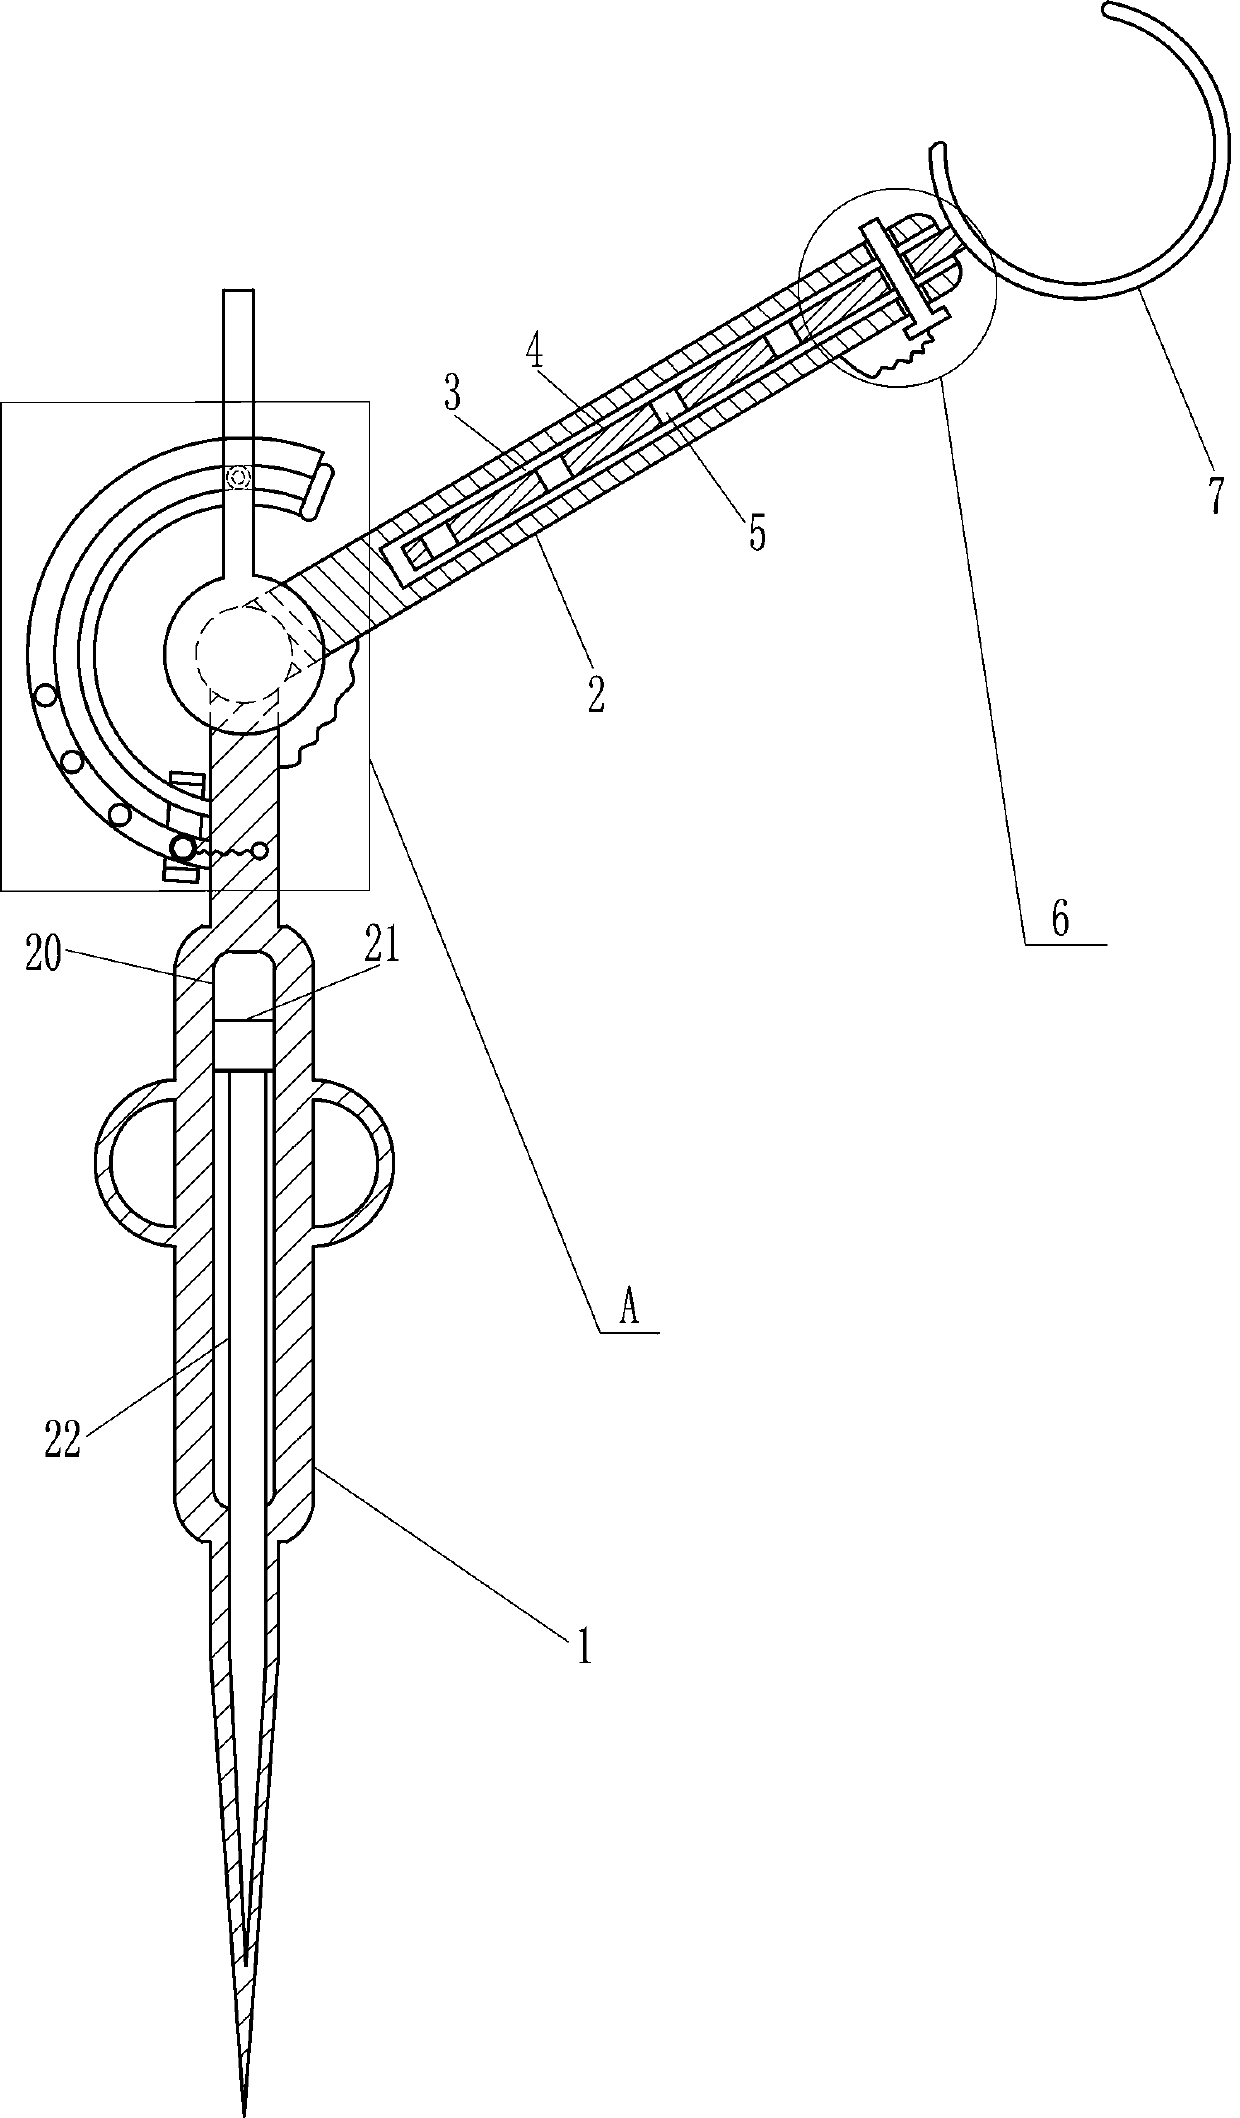 Fish pond feed casting device